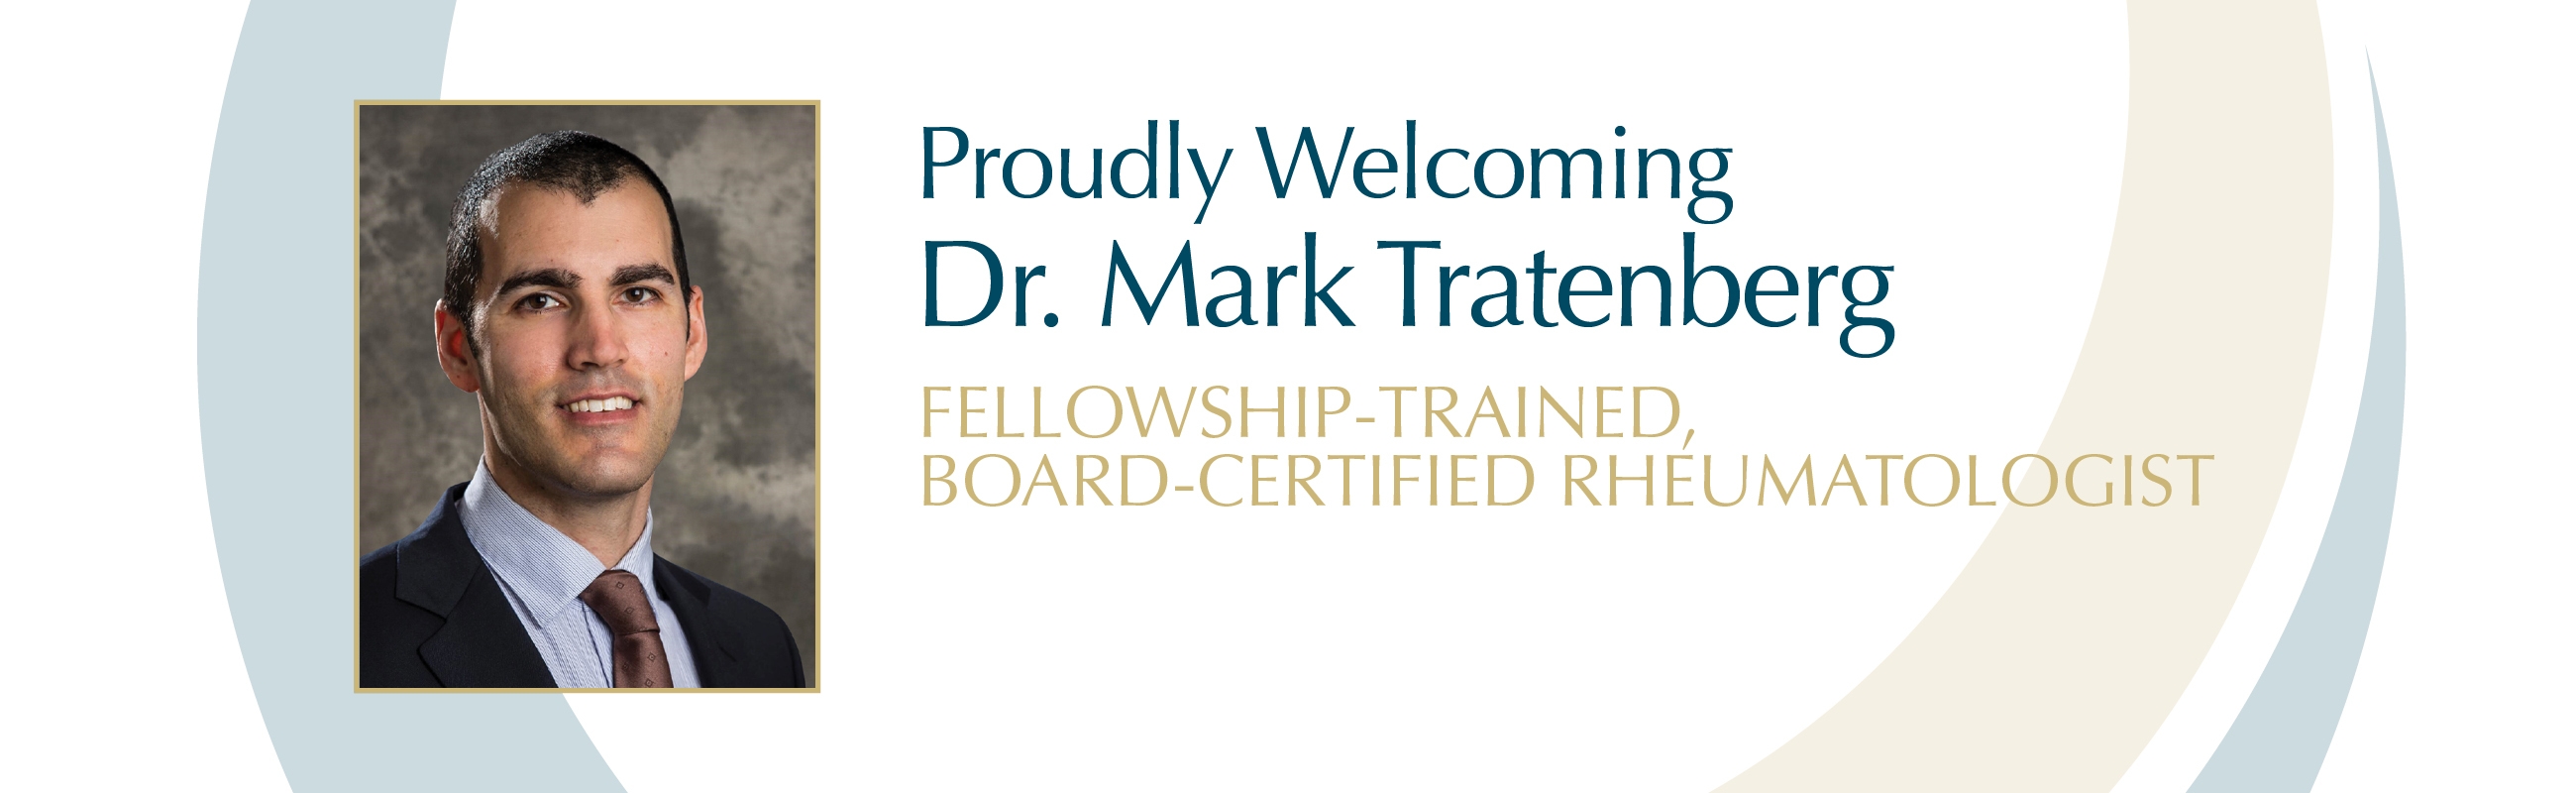 Proudly Welcoming Dr. Mark Tratenberg